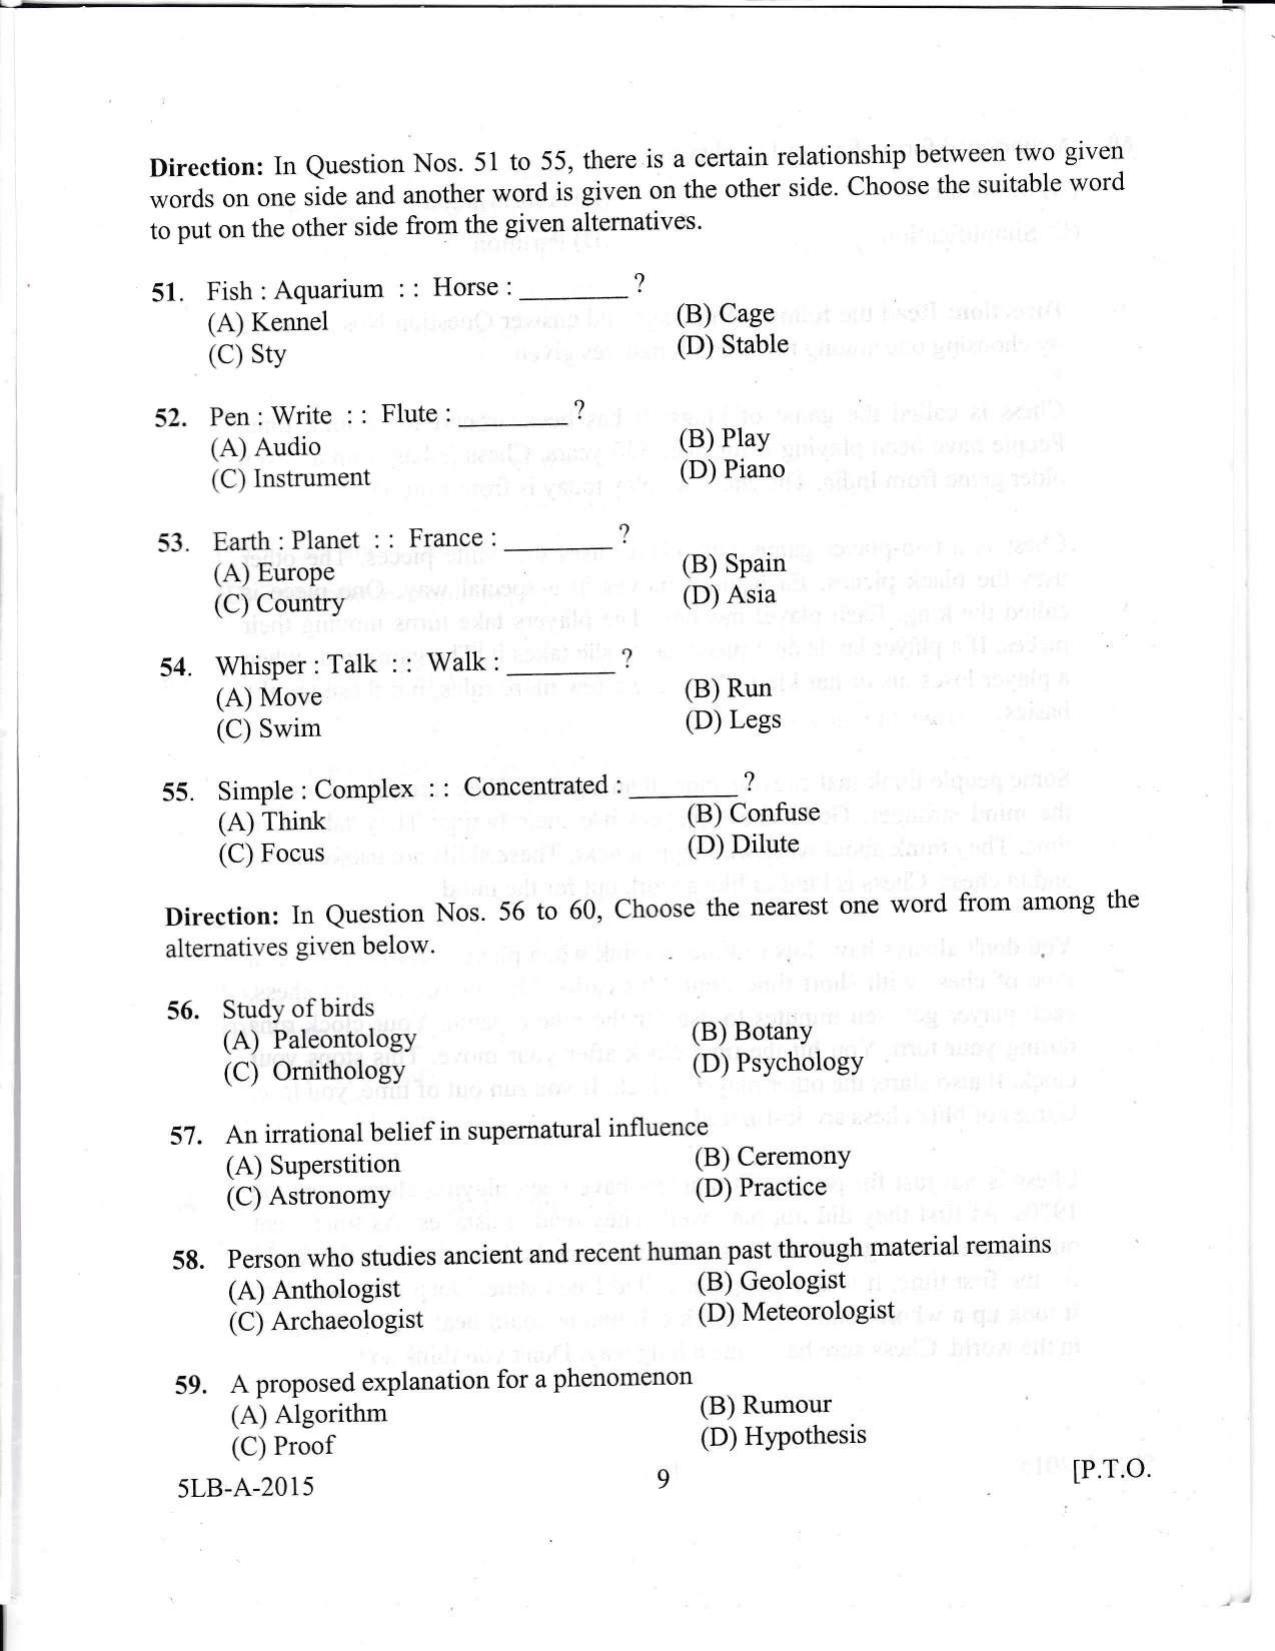 KLEE 5 Year LLB Exam 2015 Question Paper - Page 9